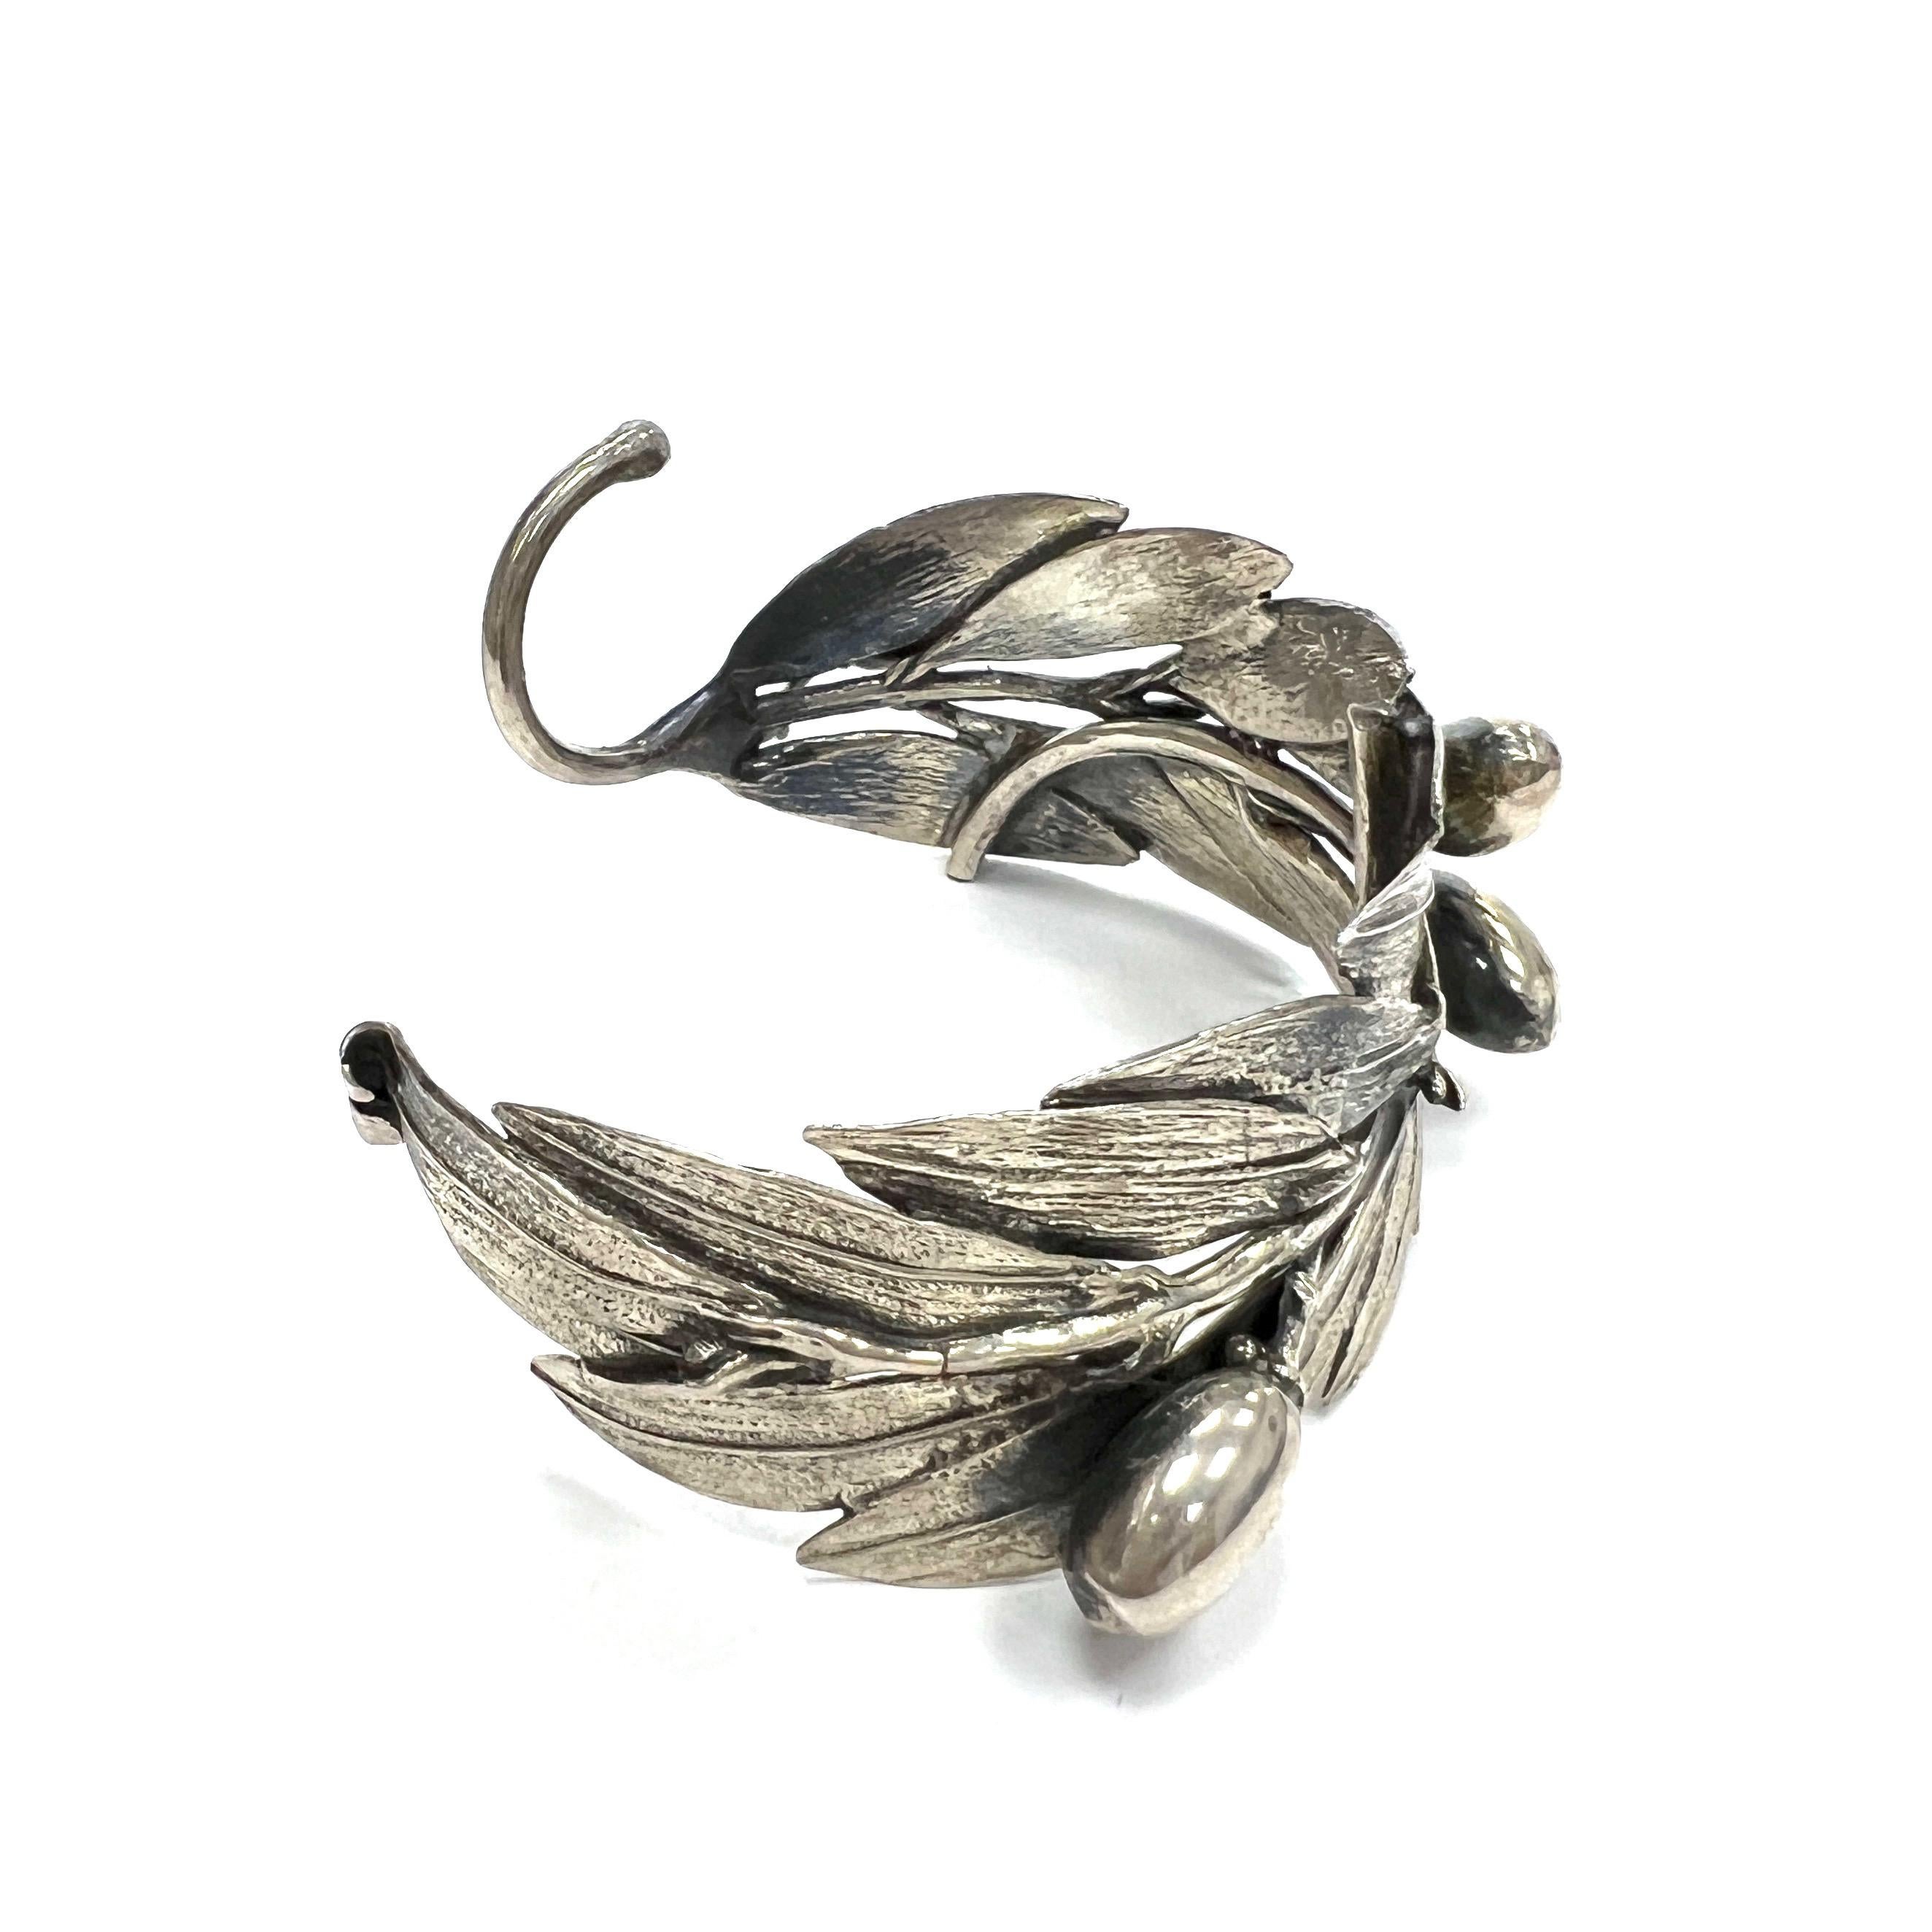 Buccellati Mario Leaf Sterling Silver Cuff Bracelet 

Olive leaf design made out of sterling silver; marked Buccellati, Italy, 925, Sterling

Size: width 1.25 inches; inner circumference 7 inches
Total weight: 45.0 grams